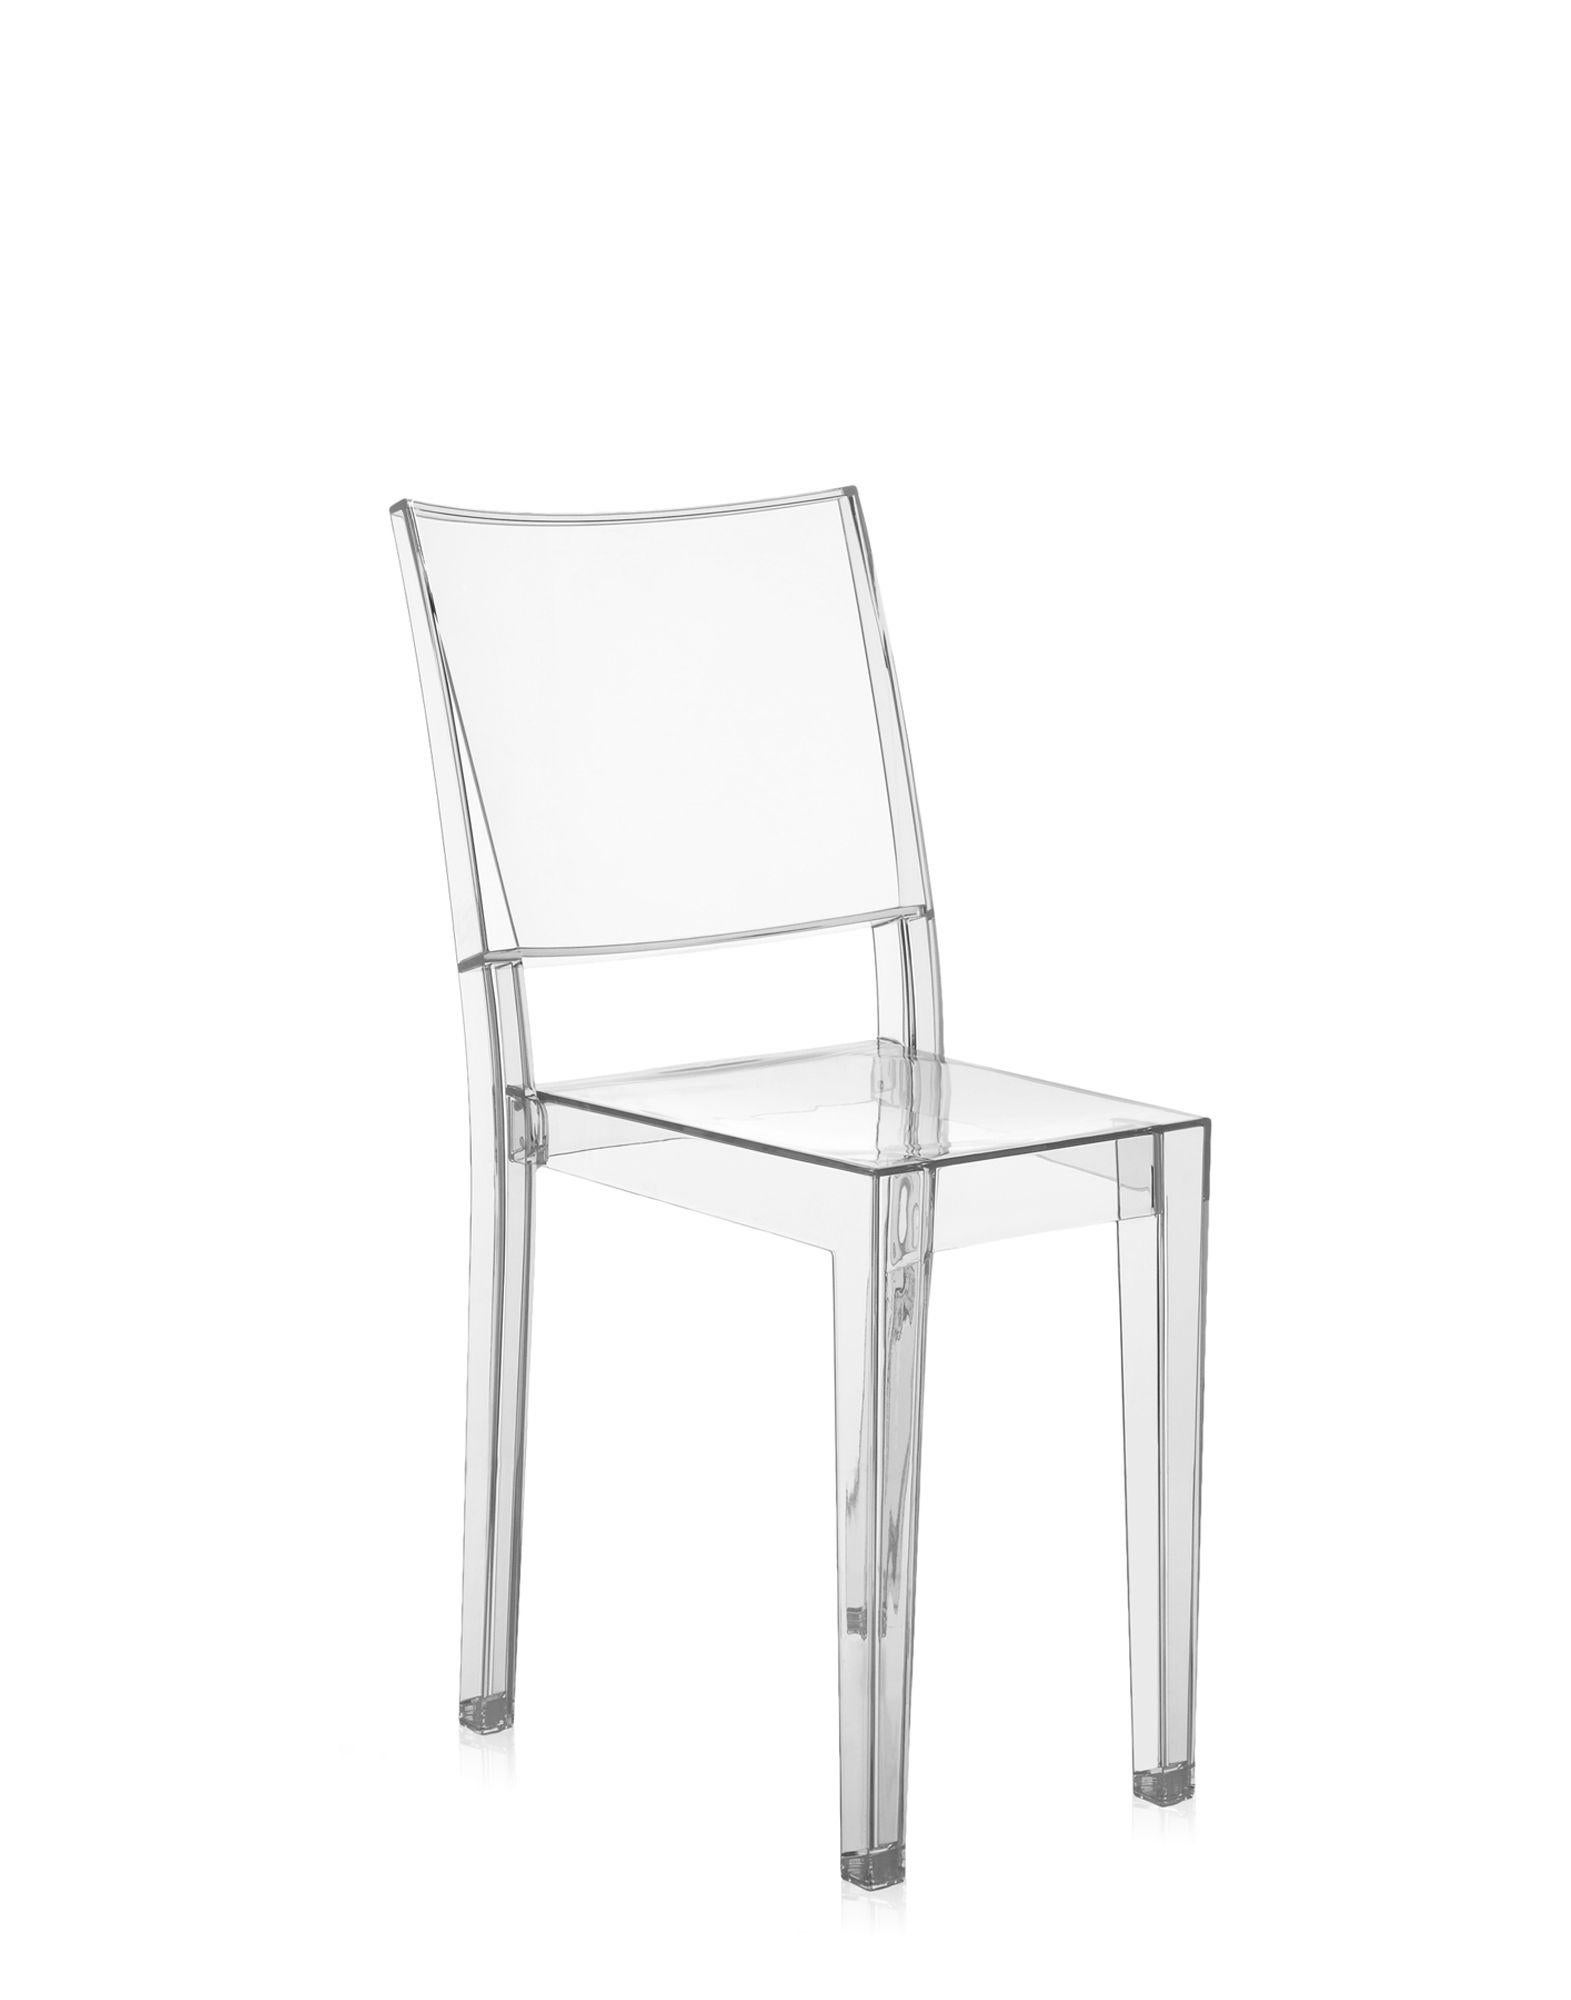 The first completely transparent chair in the world, made of polycarbonate in a single mould. Marie combines a light and impalpable image with essential design and an exceptionally strong structure. A genial pairing developed as the result of